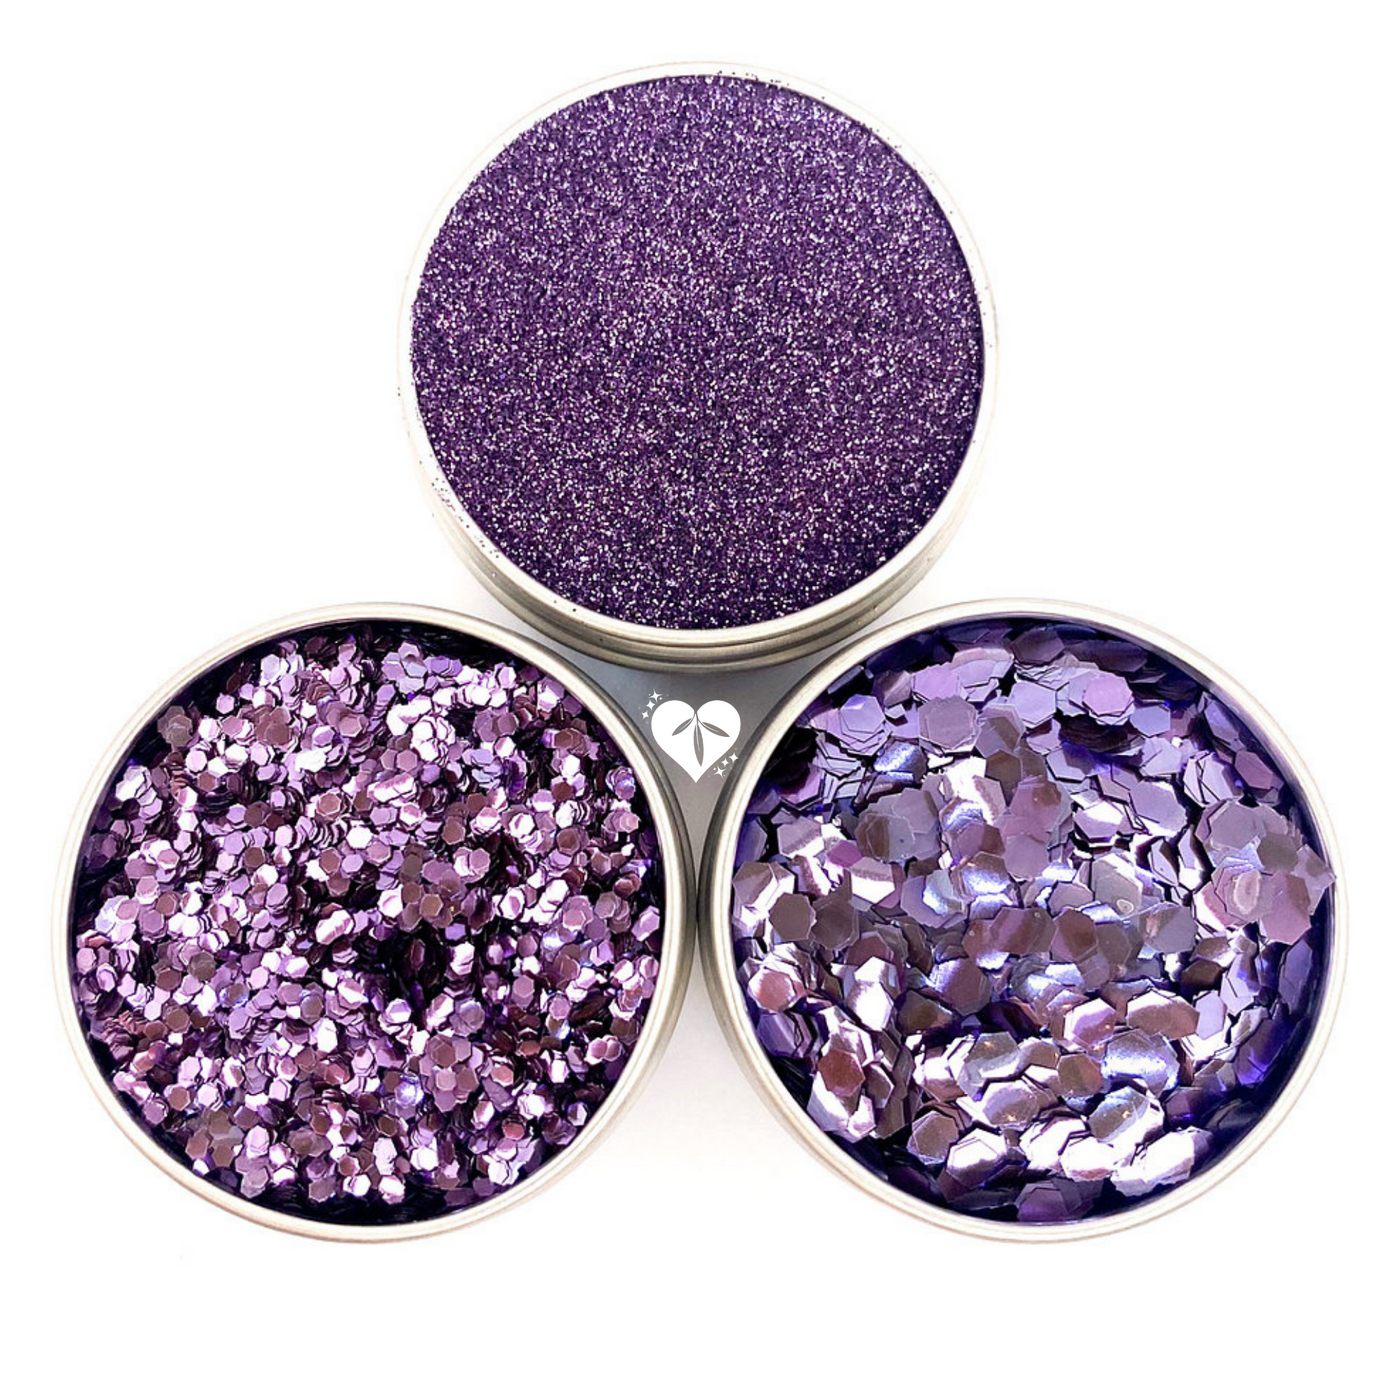 Trio of aluminium pots filled with purple biodegradable glitter in three individual flake sizes. Fine, chunky and ultra chunky glitters.